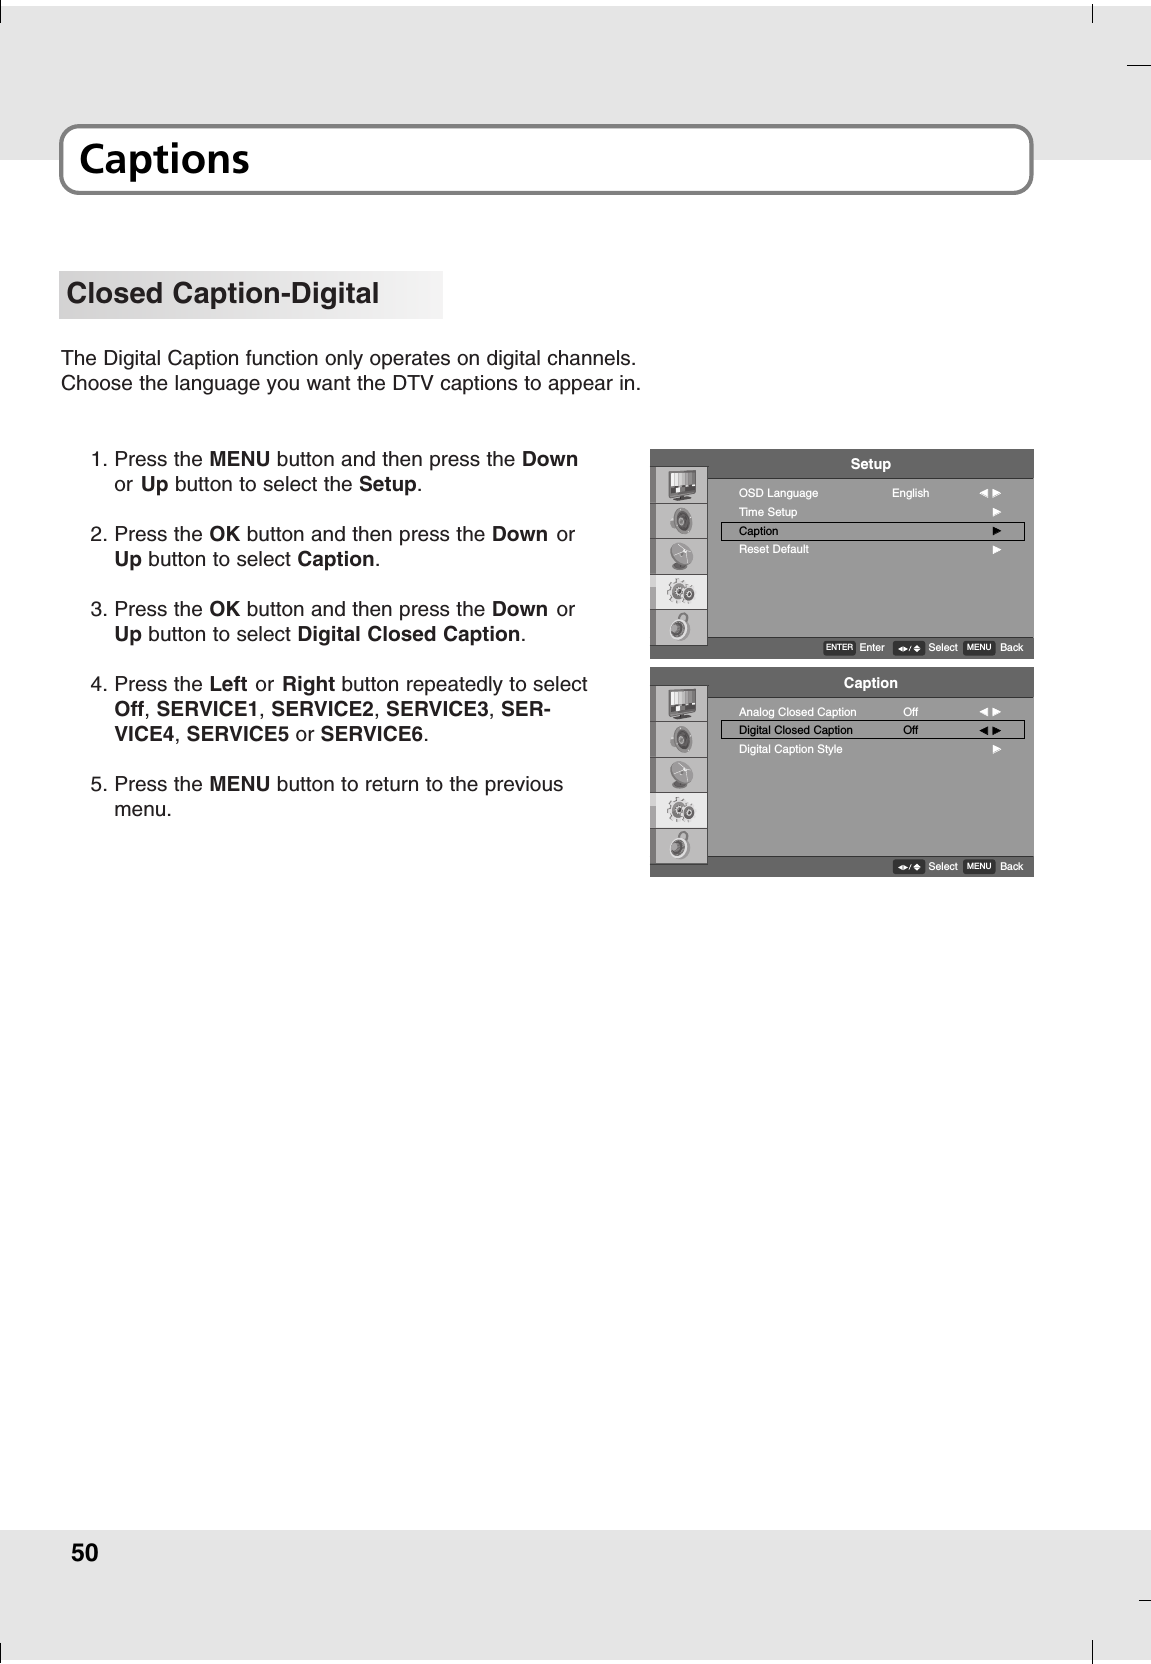 50CaptionsClosed Caption-DigitalThe Digital Caption function only operates on digital channels.Choose the language you want the DTV captions to appear in.1. Press the MENU button and then press the Downor Up button to select the Setup.2. Press the OK button and then press the Down orUp button to select Caption.3. Press the OK button and then press the Down orUp button to select Digital Closed Caption.4. Press the Left or Right button repeatedly to selectOff, SERVICE1,SERVICE2, SERVICE3,SER-VICE4,SERVICE5 or SERVICE6.5. Press the MENU button to return to the previousmenu.SetupOSD LanguageTime SetupCaptionReset DefaultEnglish FF  GGGGGGGGENTEREnter MENU BackSelectCaptionAnalog Closed CaptionDigital Closed CaptionDigital Caption StyleOffOffFF  GGFF  GGGGMENU BackSelect